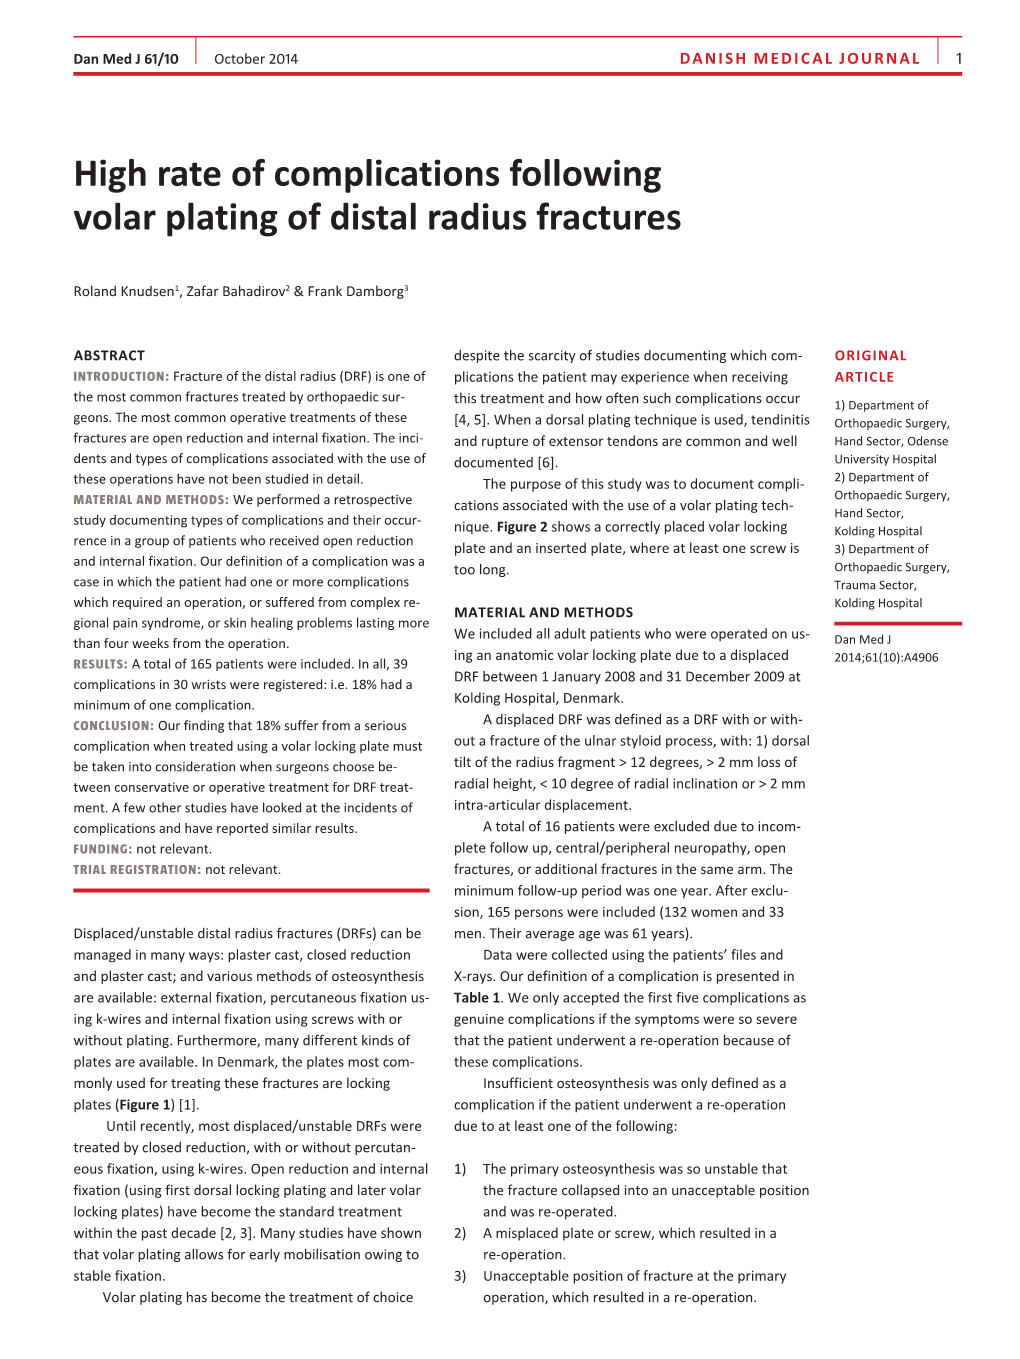 High Rate of Complications Following Volar Plating of Distal Radius Fractures